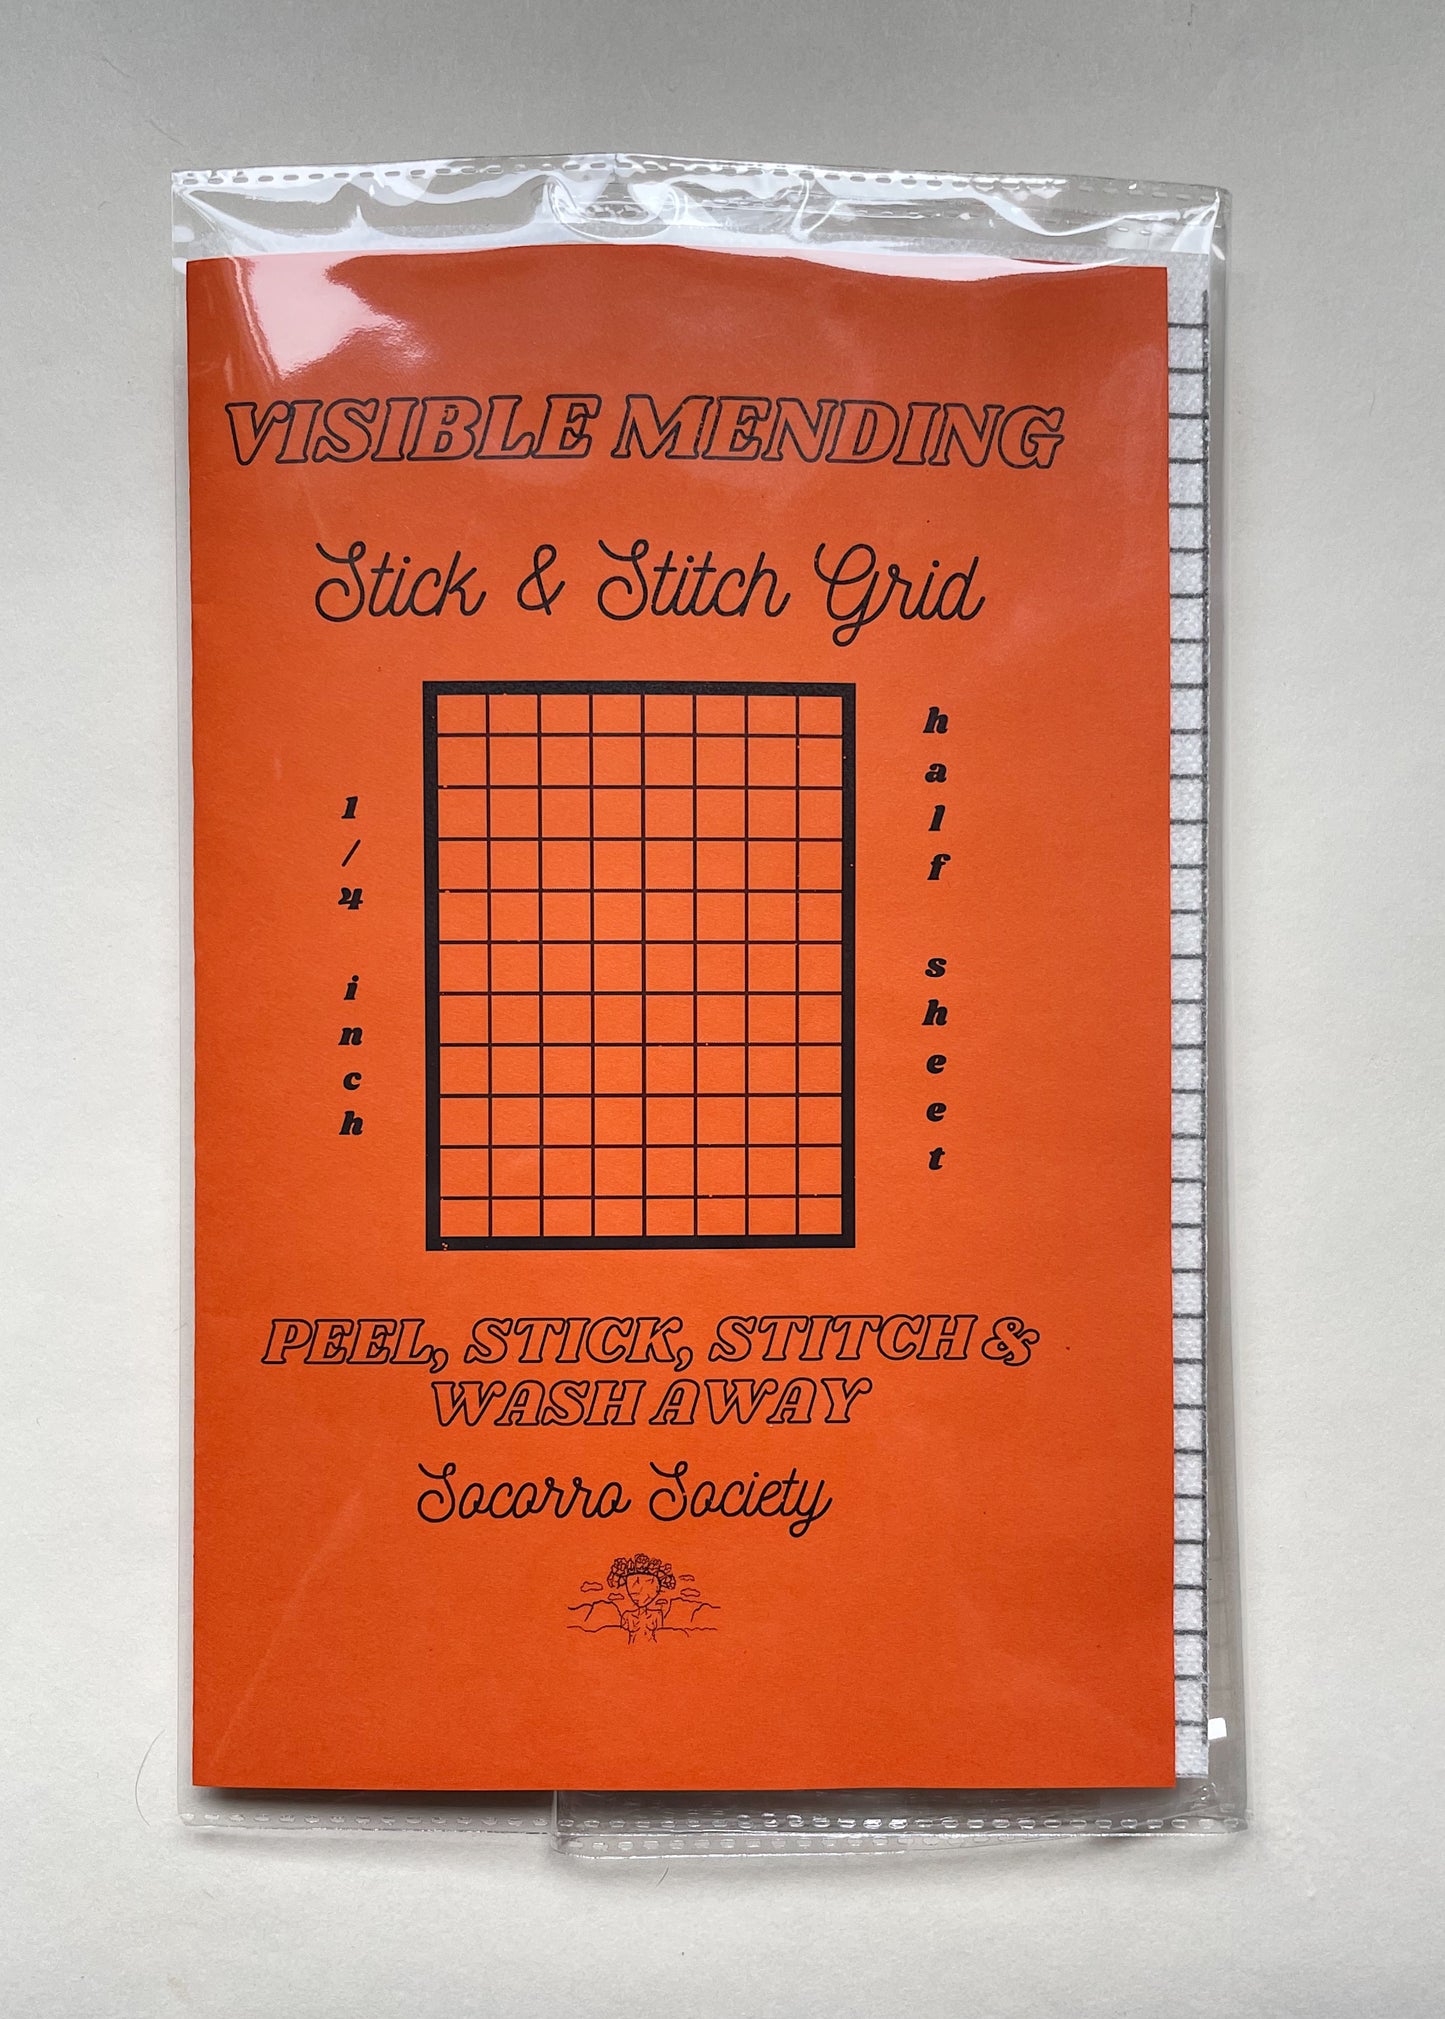 Visible Mending Stick and Stitch Grid 1/2 sheet